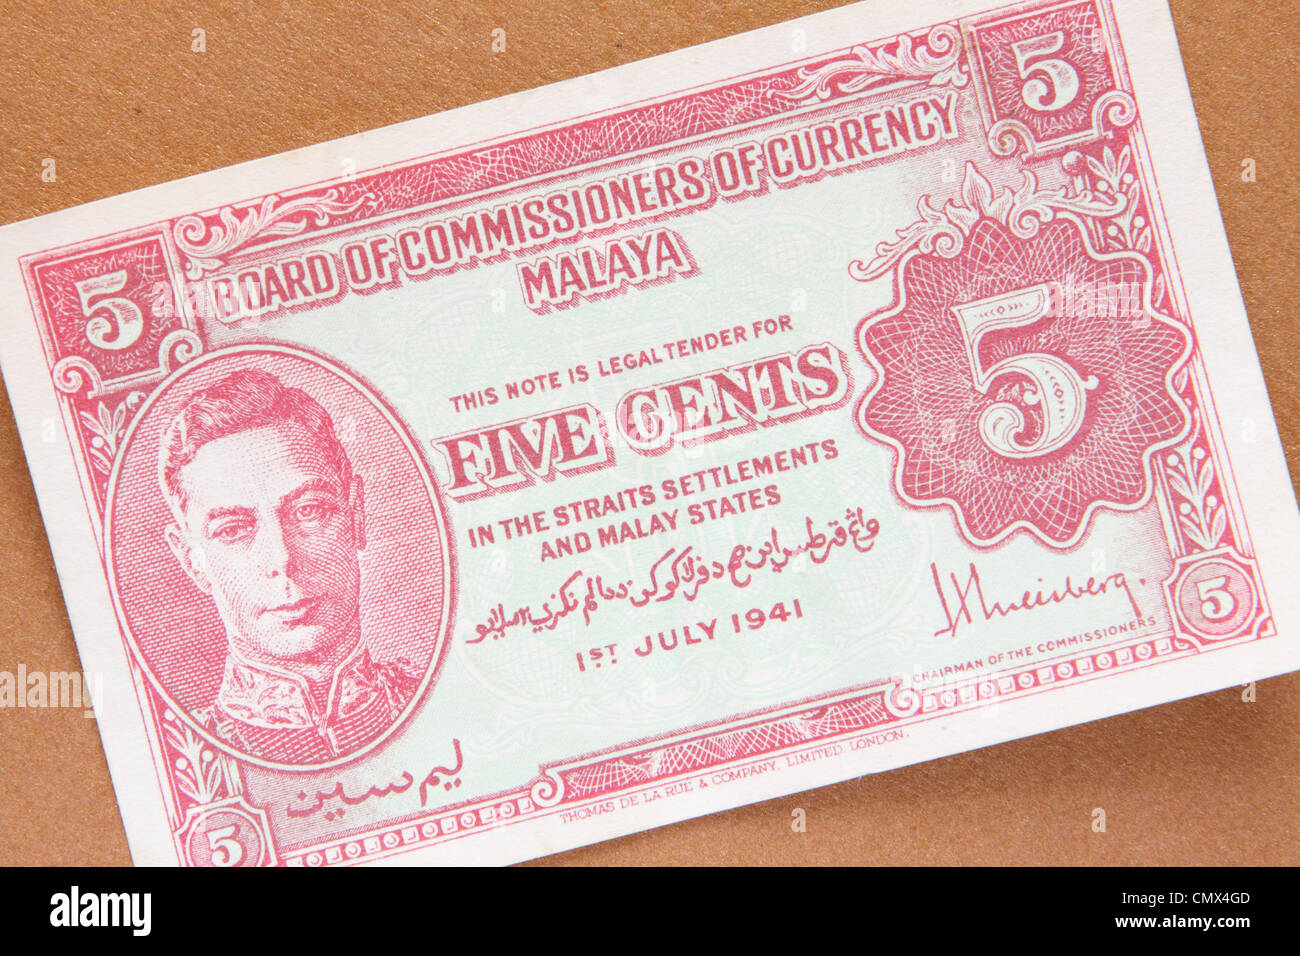 Malaya banknote dated 1941 for The Straits Settlements and Malay States with image of King George VI - 5 cents Stock Photo